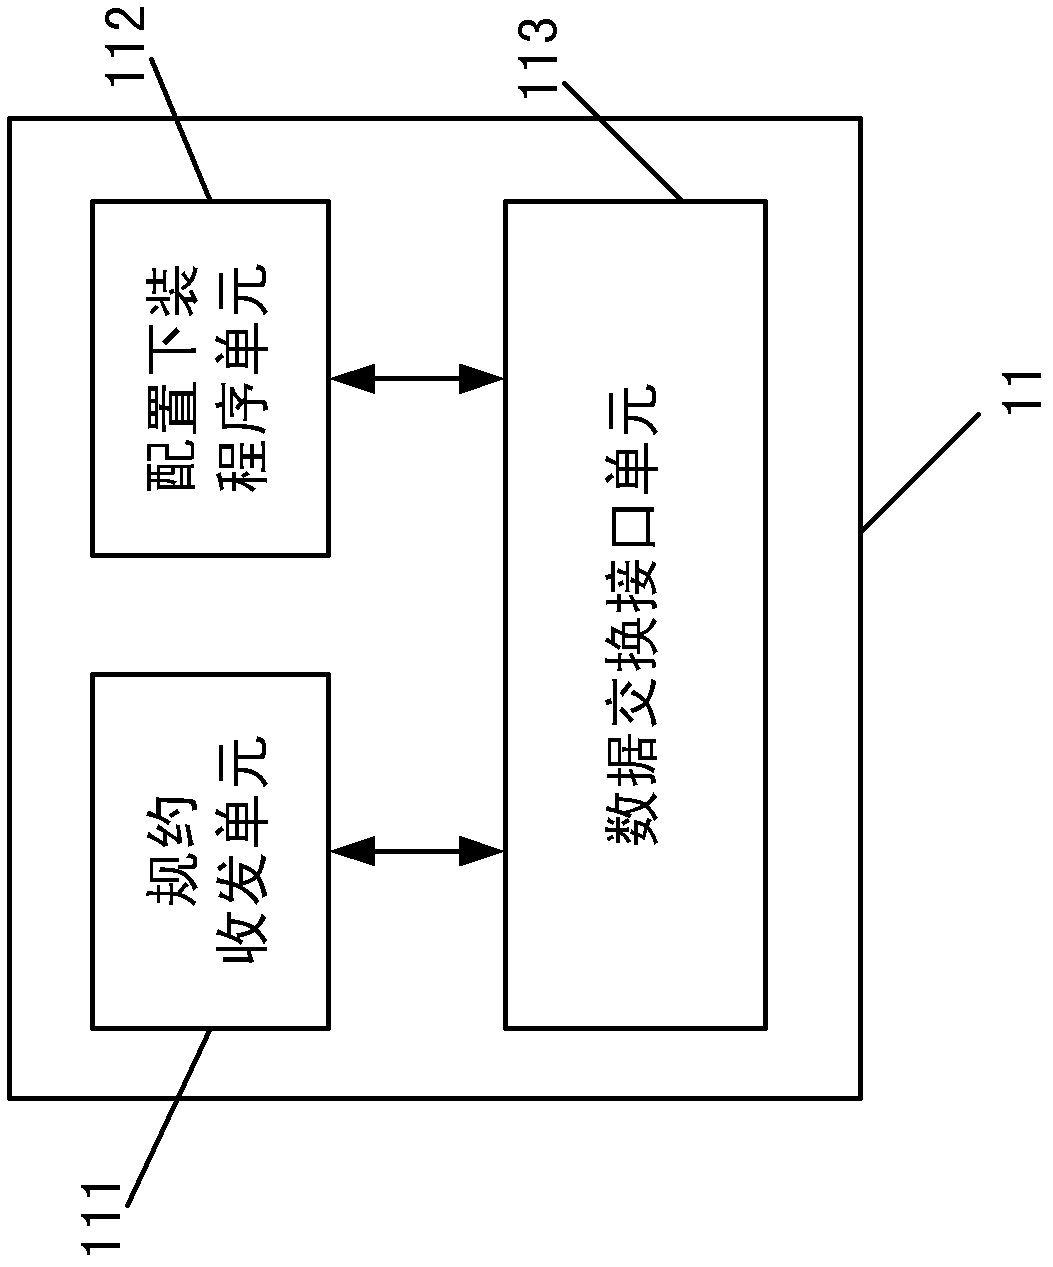 Electrical telemechanical host with plant-level automatic power generation function